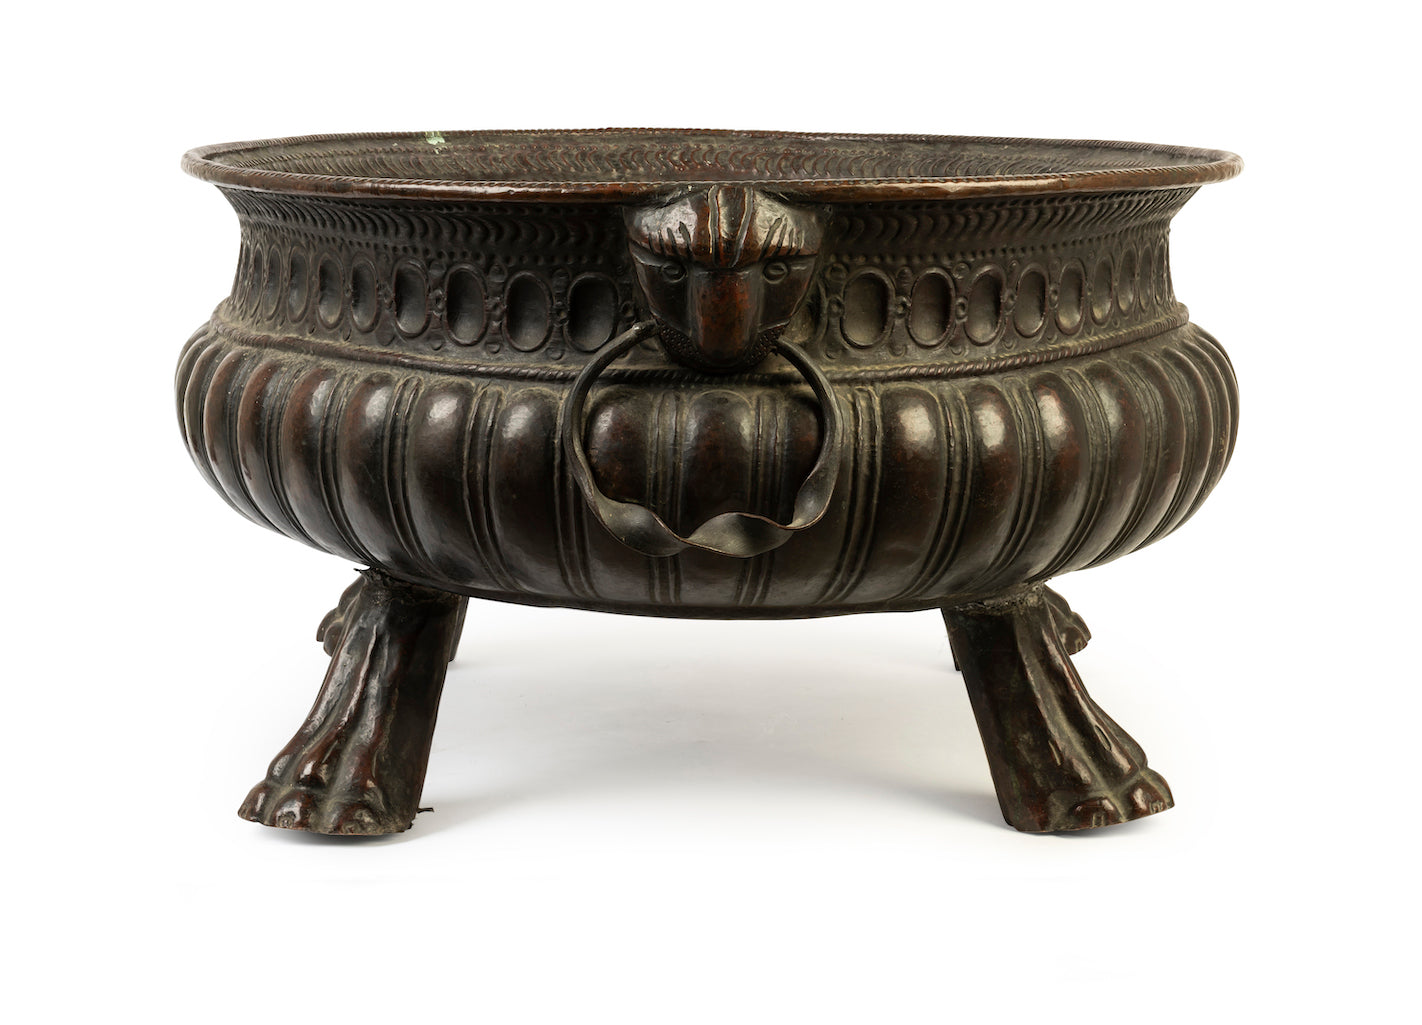 SOLD An impressive oval repousse copper jardeniere, Continental, 19th Century or earlier